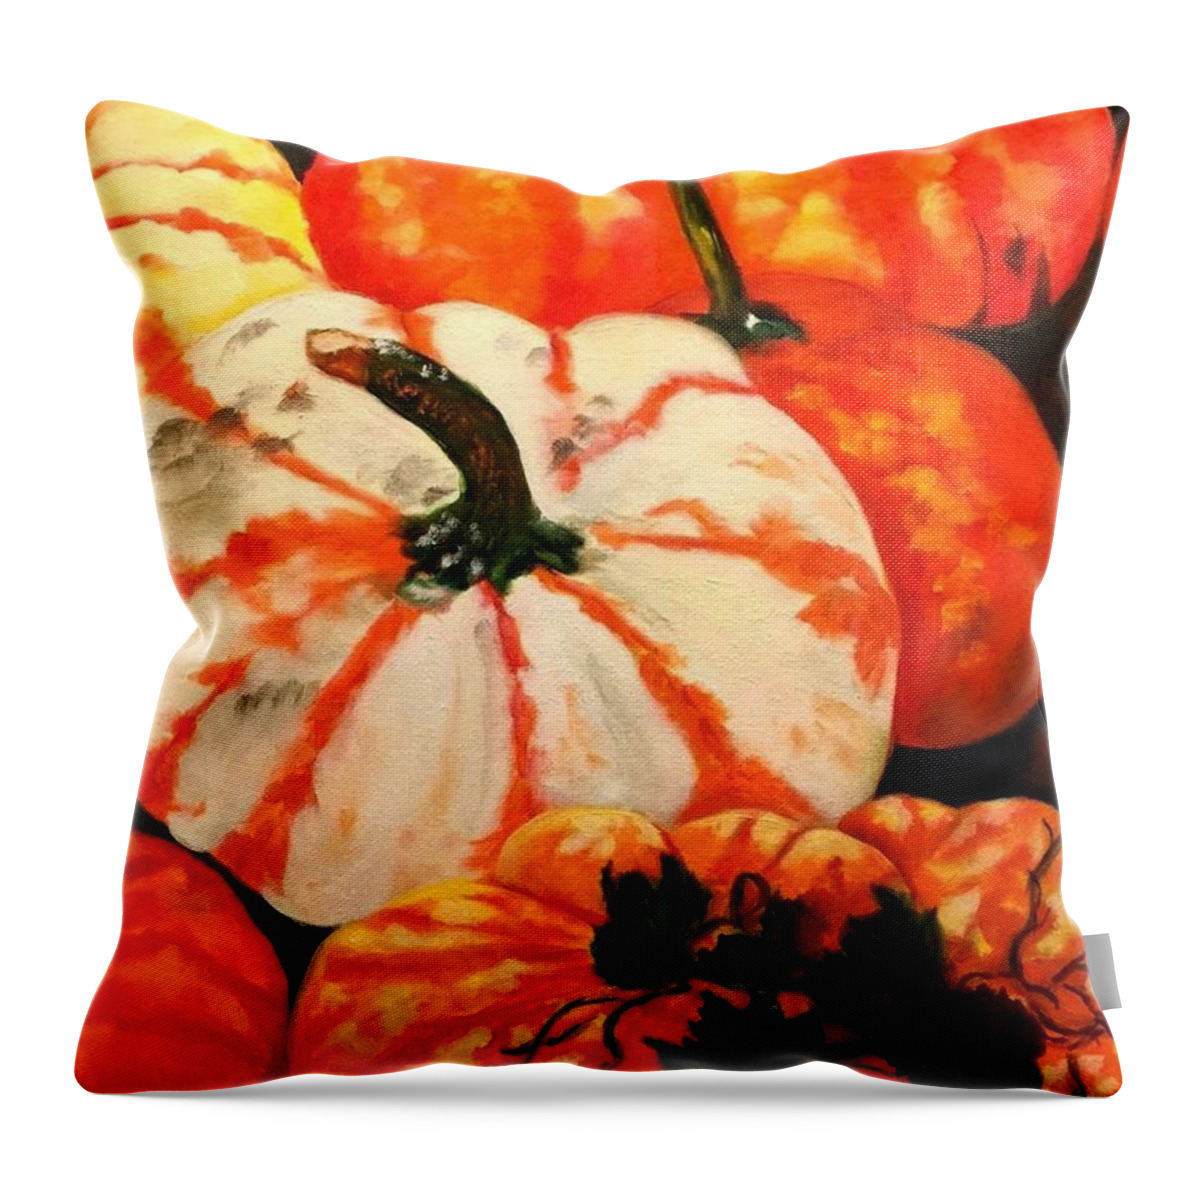 Fall Throw Pillow featuring the painting Bountiful Harvest by Juliette Becker